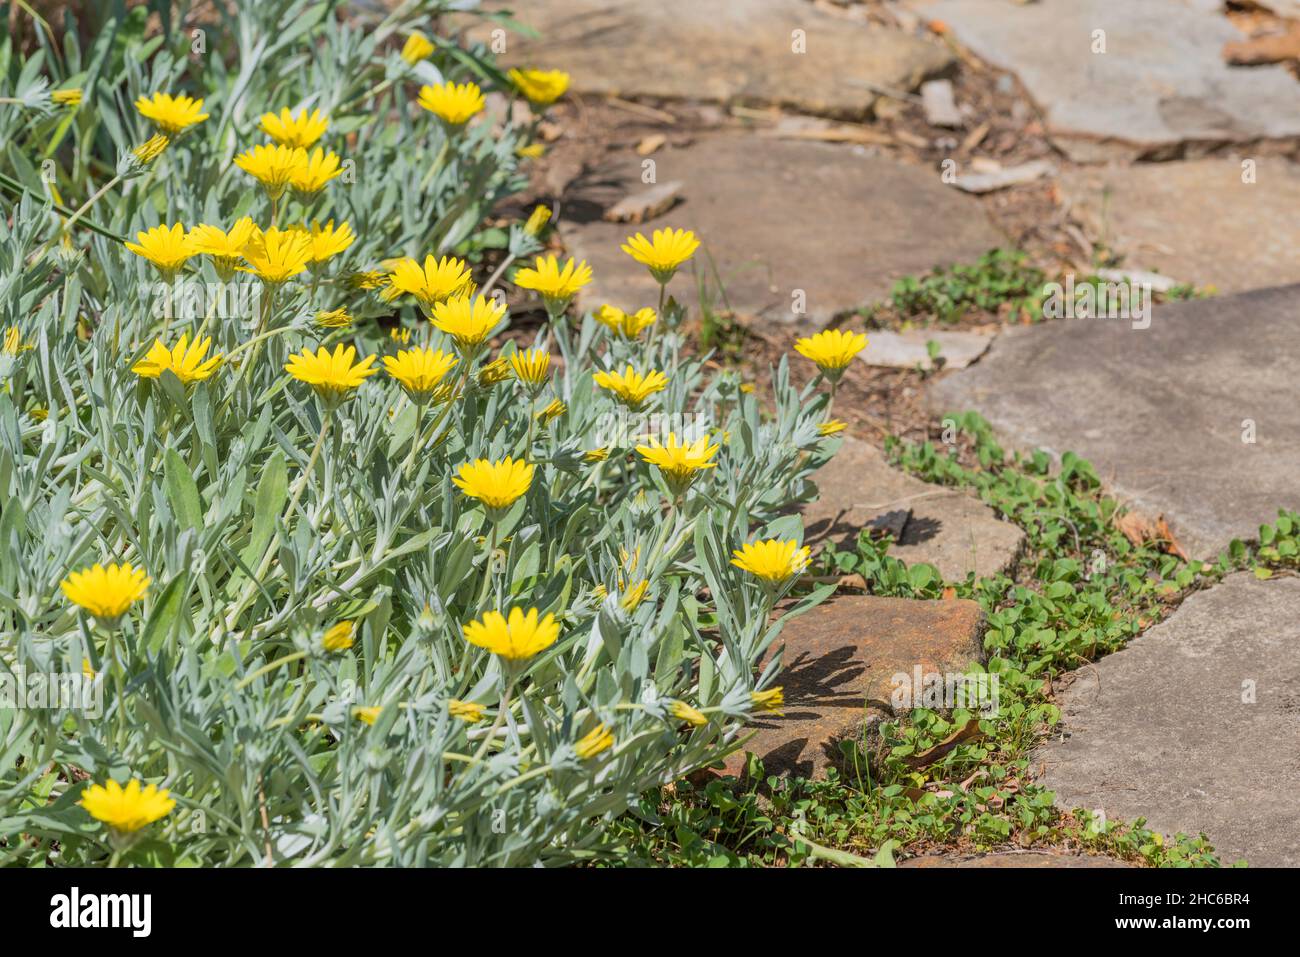 Gazania tomentosa or Silver Leaf Gazania is a yellow flowering ground cover from South Africa Stock Photo